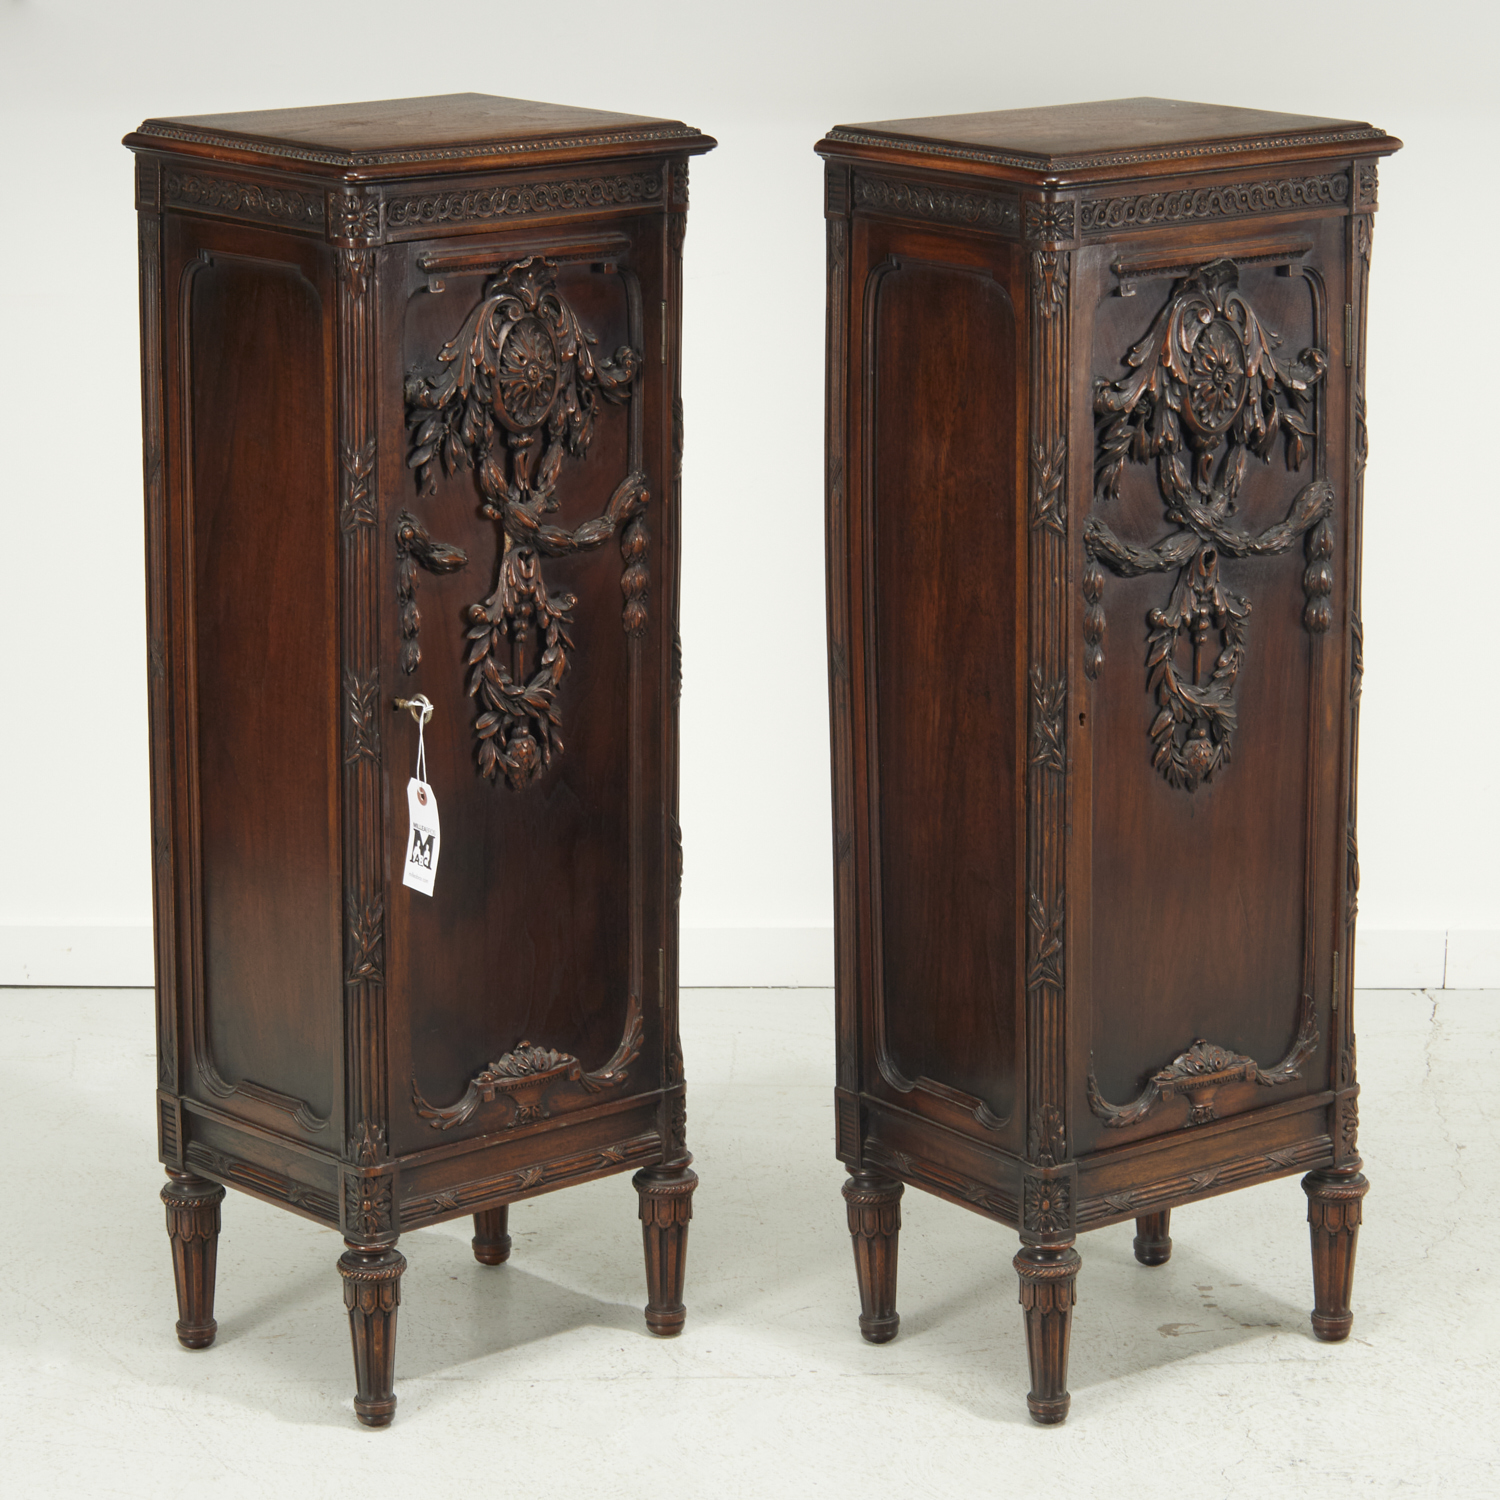 PAIR LOUIS XVI STYLE SIDE CABINETS 36135c